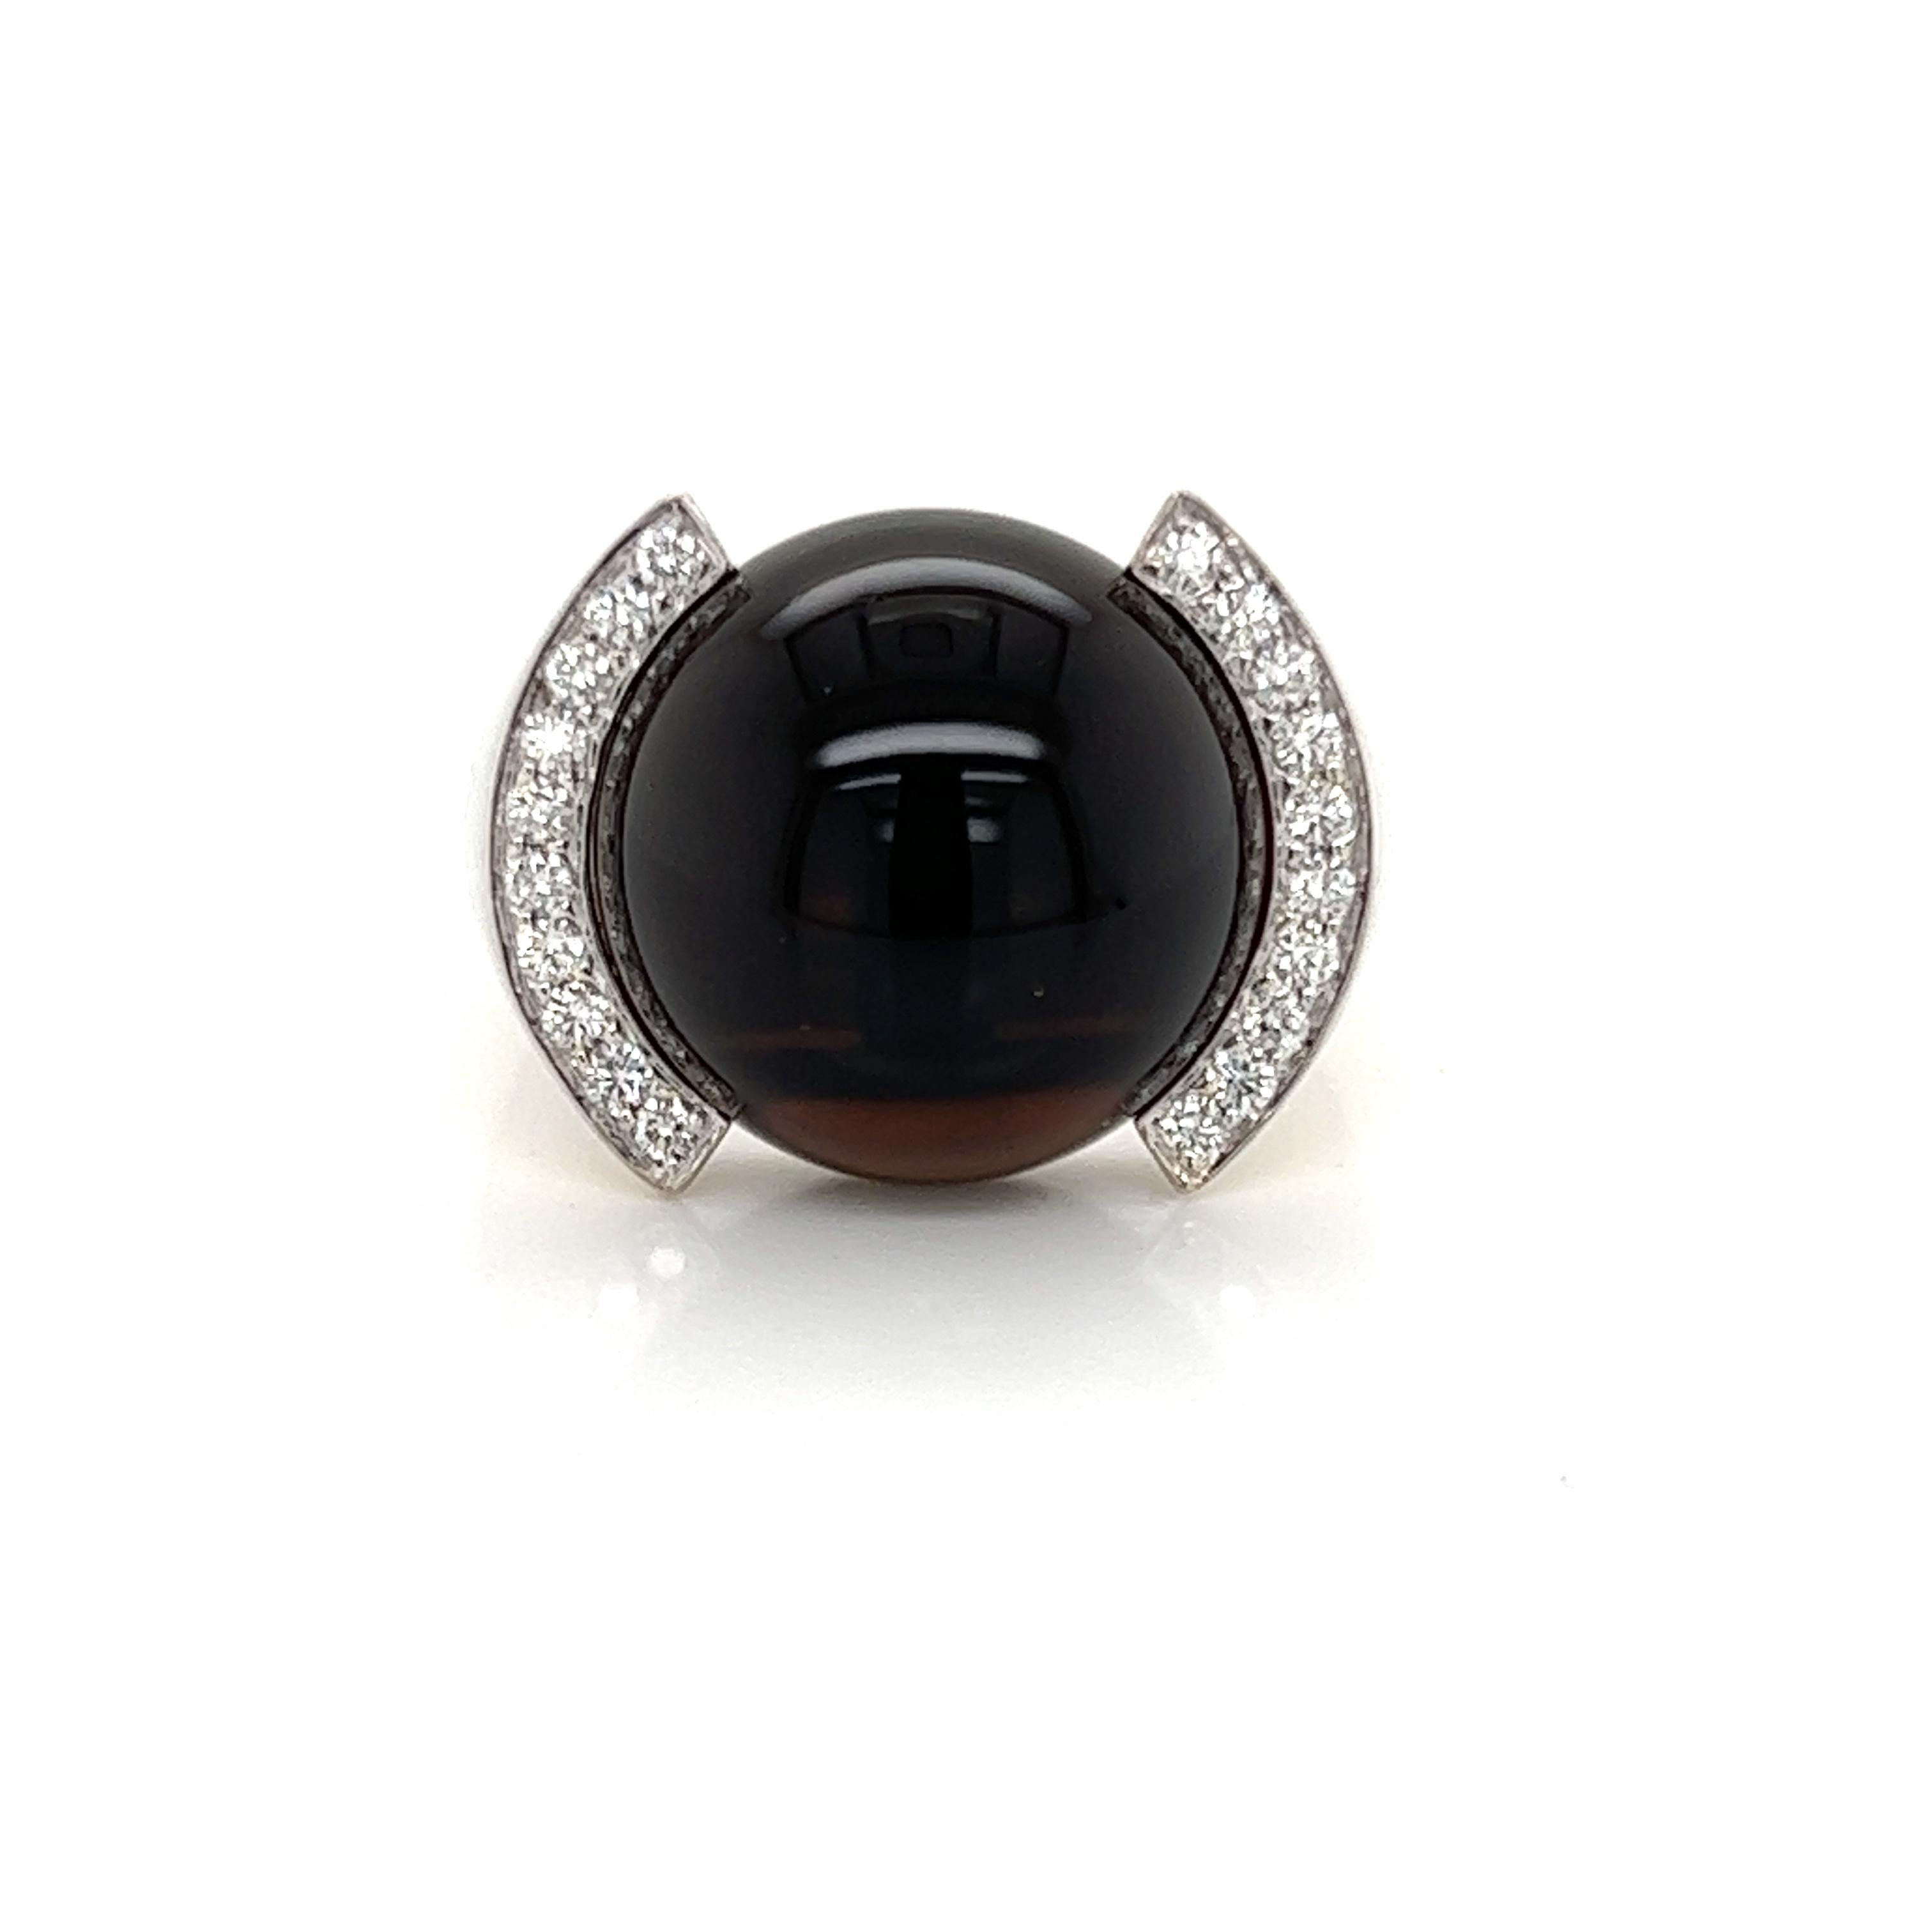 This is a beautiful authentic ring from Cartier. It is crafted from 18k white gold with a polished finish featuring a half bezel set large 16mm round smoky quartz gemstone accented 10 round cut diamond on each side bezel frame. The cabochon dome